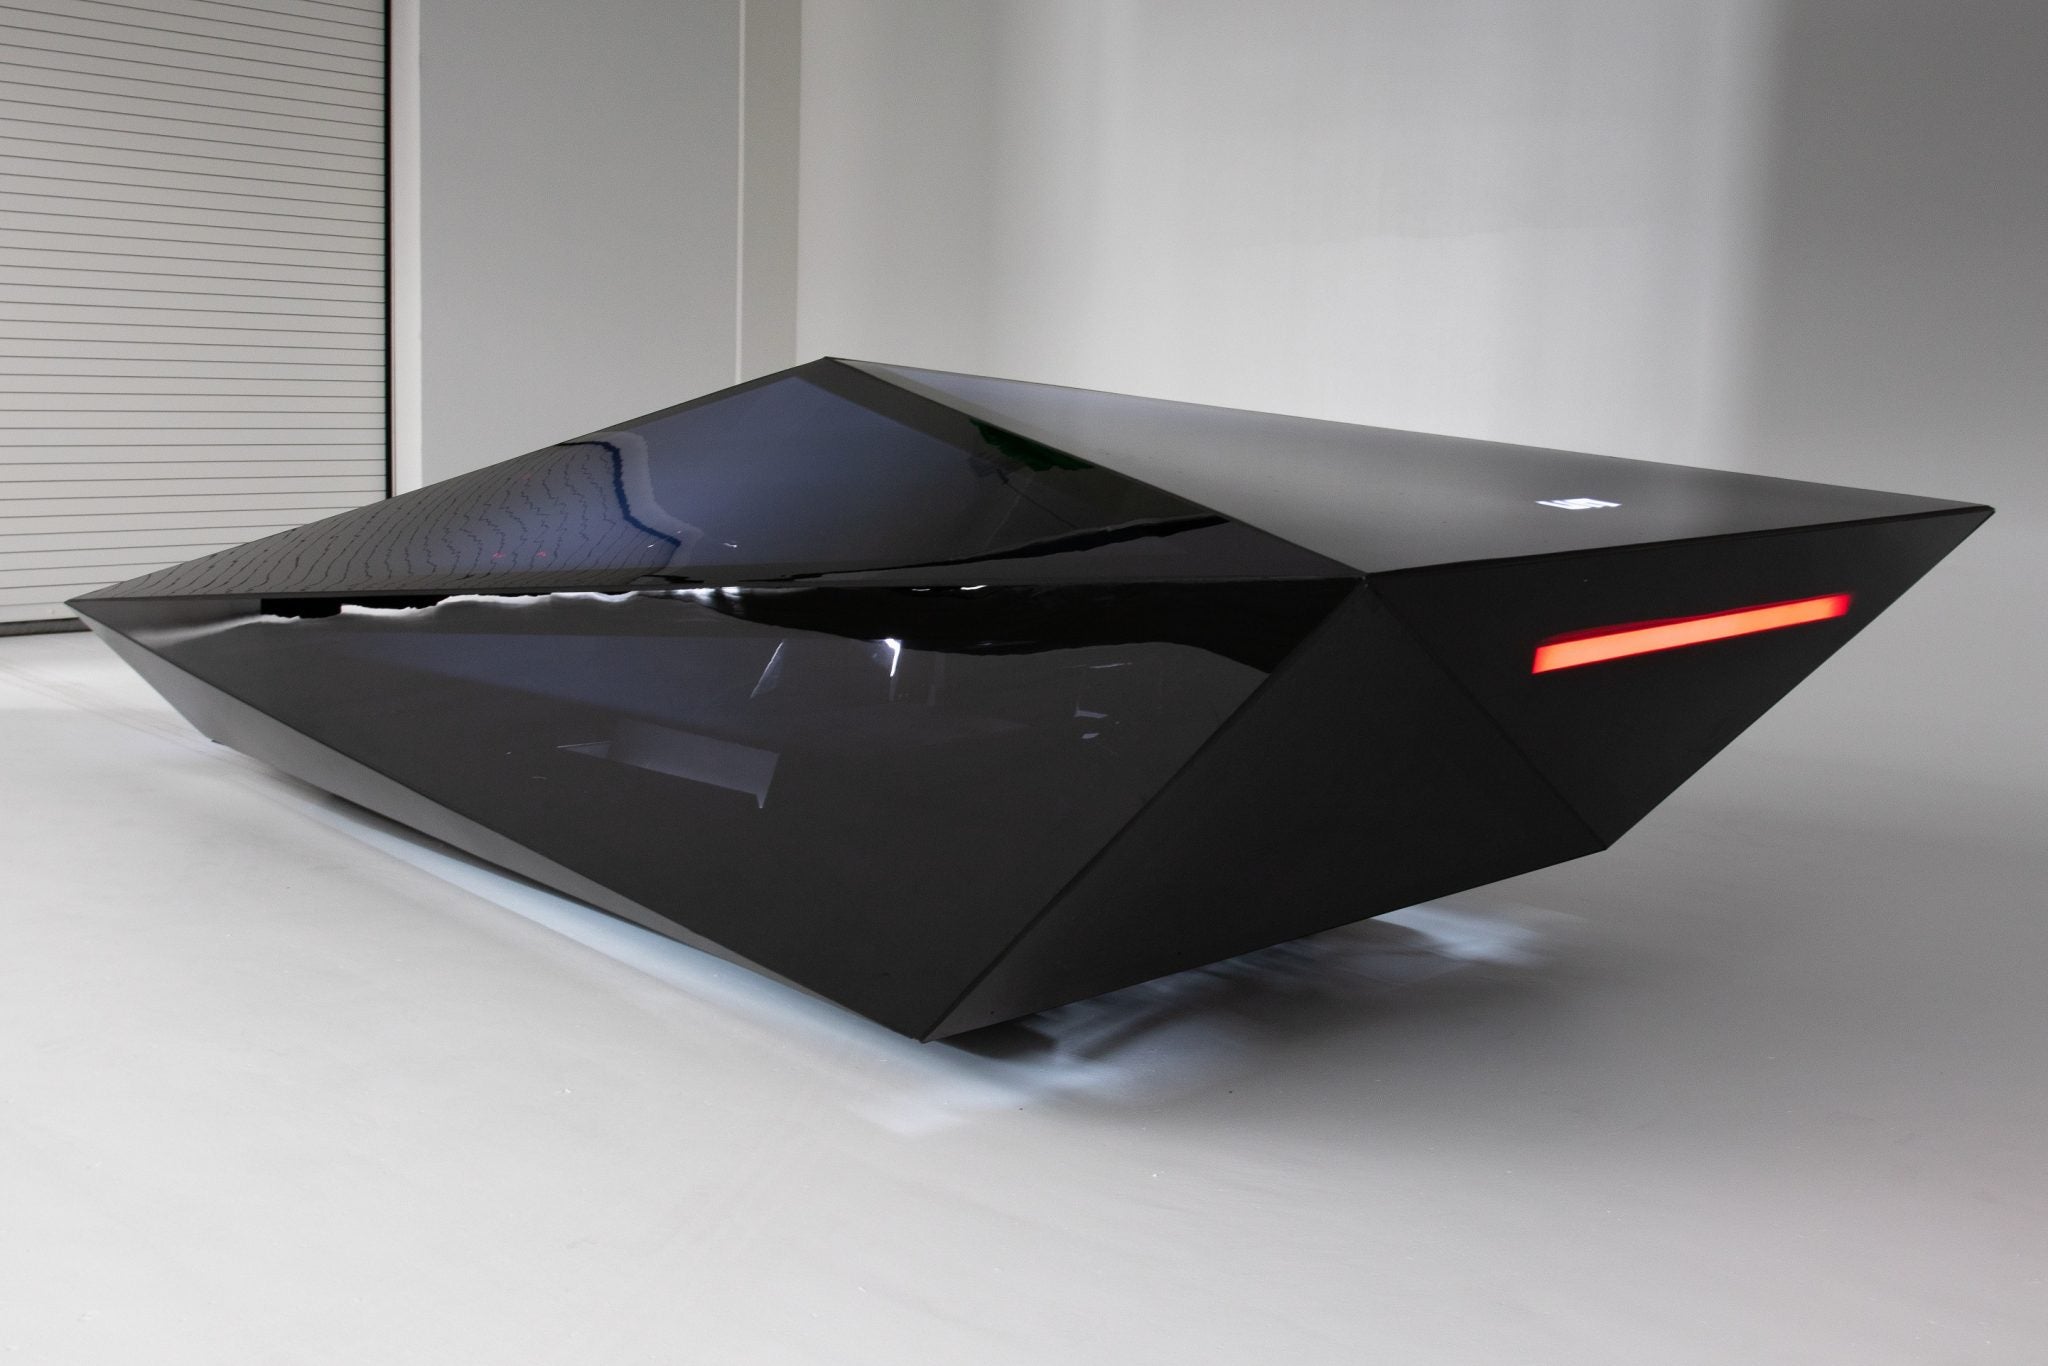 The Fantastic ‘Lo-Res Car’ Looks Like A WiFi Router And Is Begging For A Drivetrain Swap